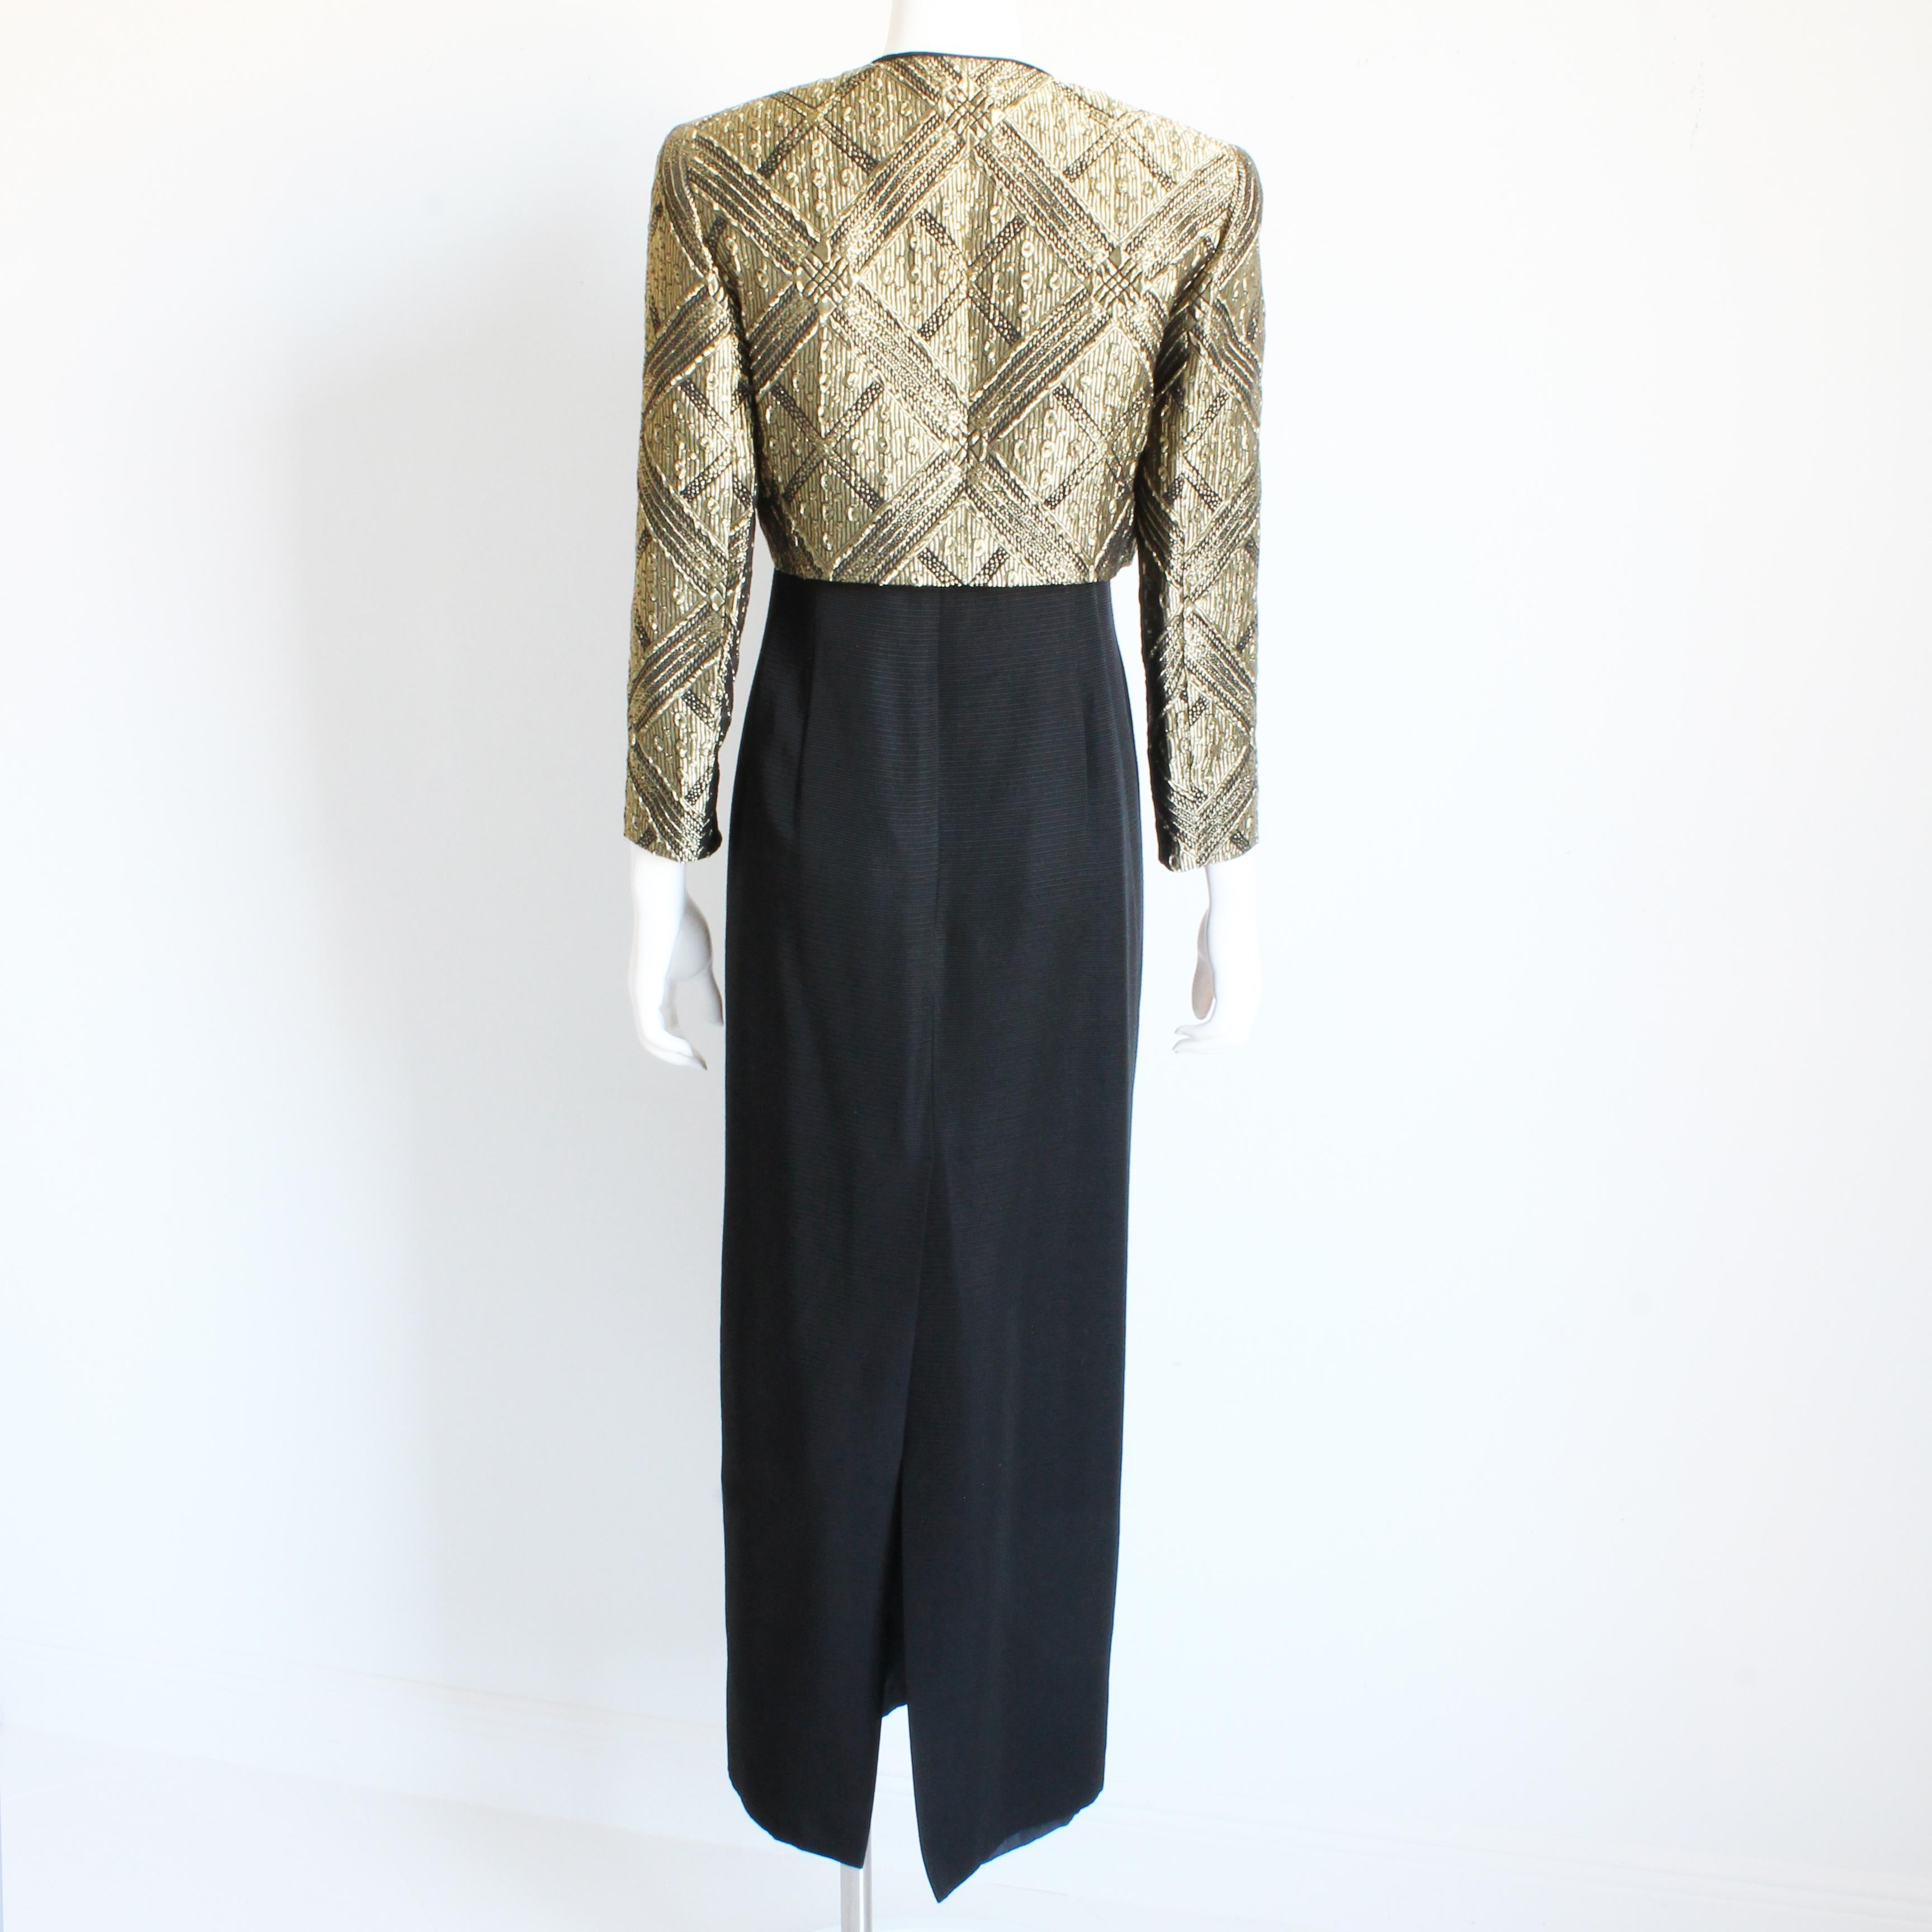 Louis Feraud Evening Gown and Jacket 2pc Long Gold Metallic Brocade Vintage 90s  For Sale 5